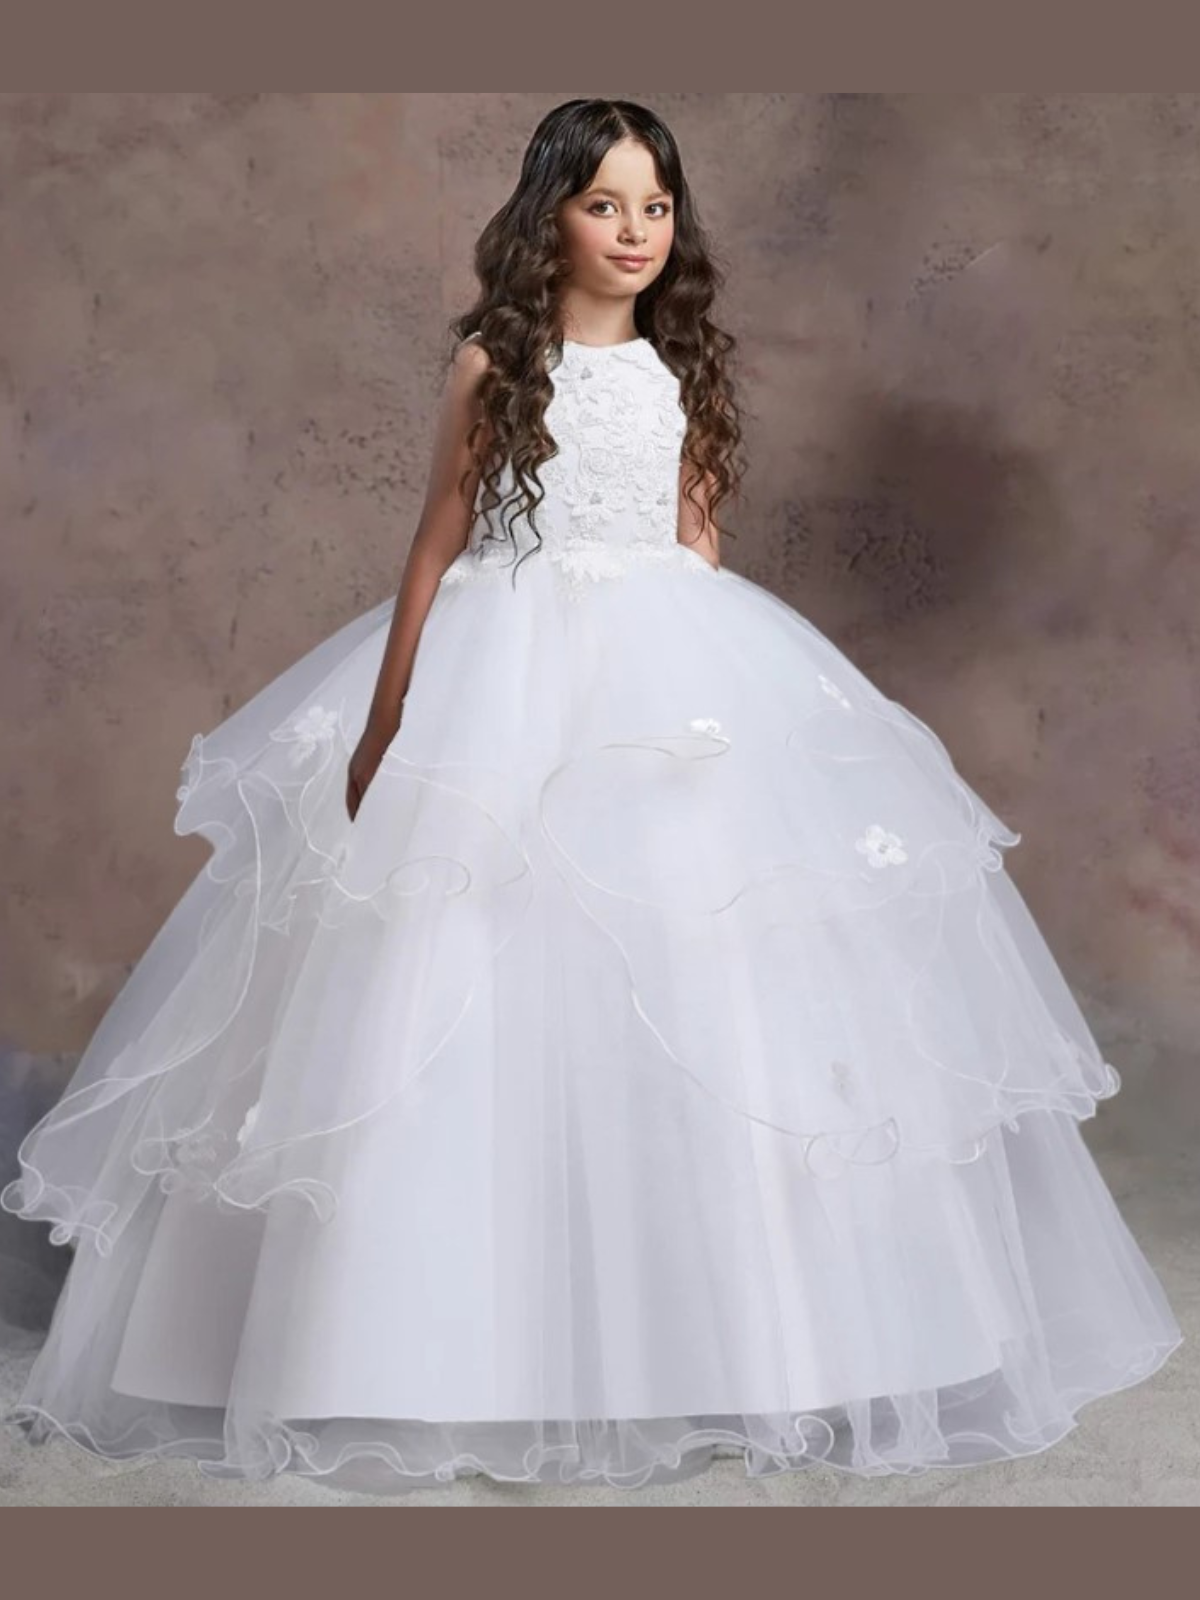 Girls Communion Dresses | White Flower Embroidered Layered Tulle Dress ...